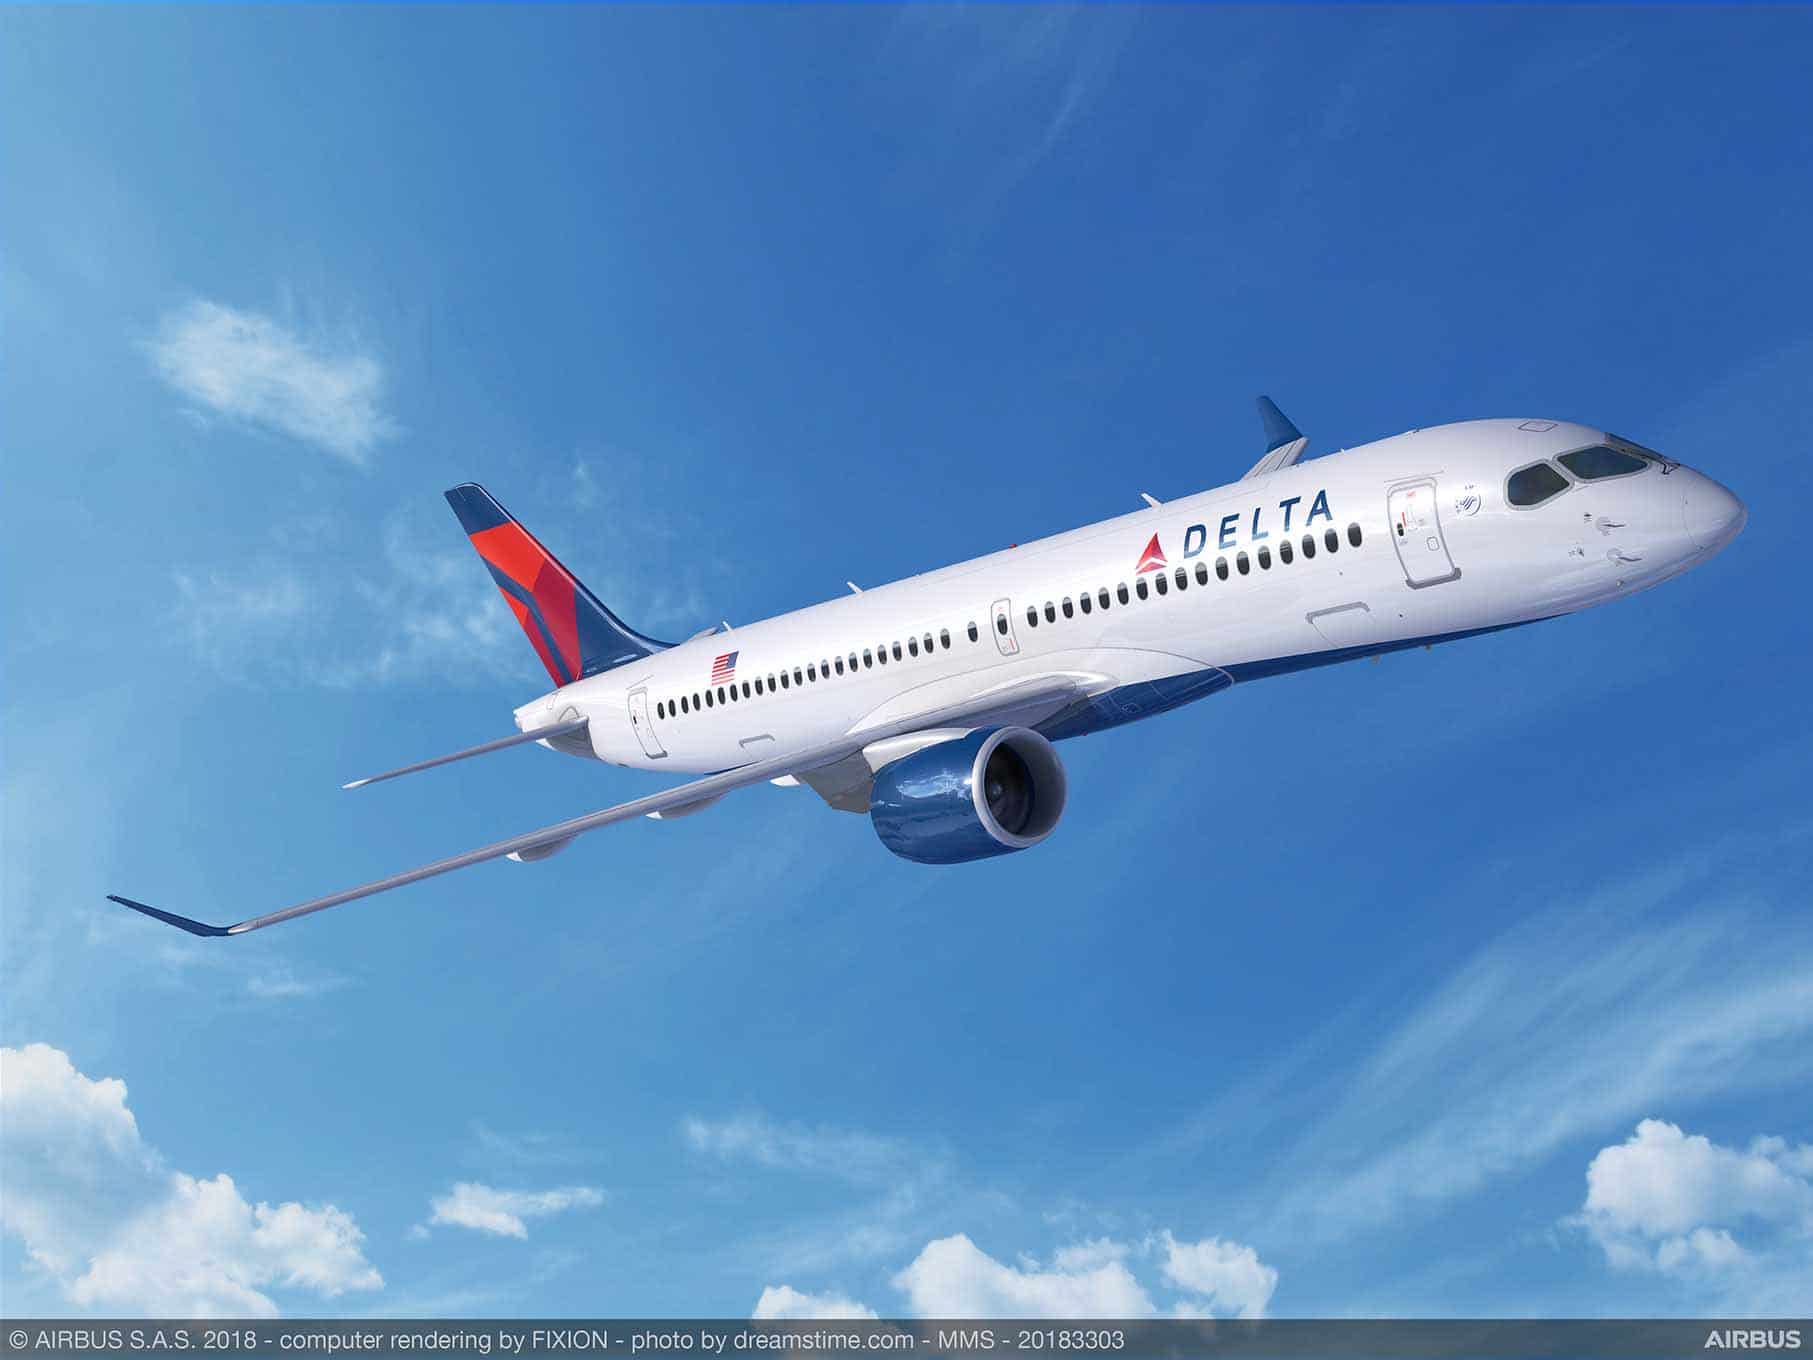 Delta Air Lines books order for additional 15 Airbus A220 aircraft